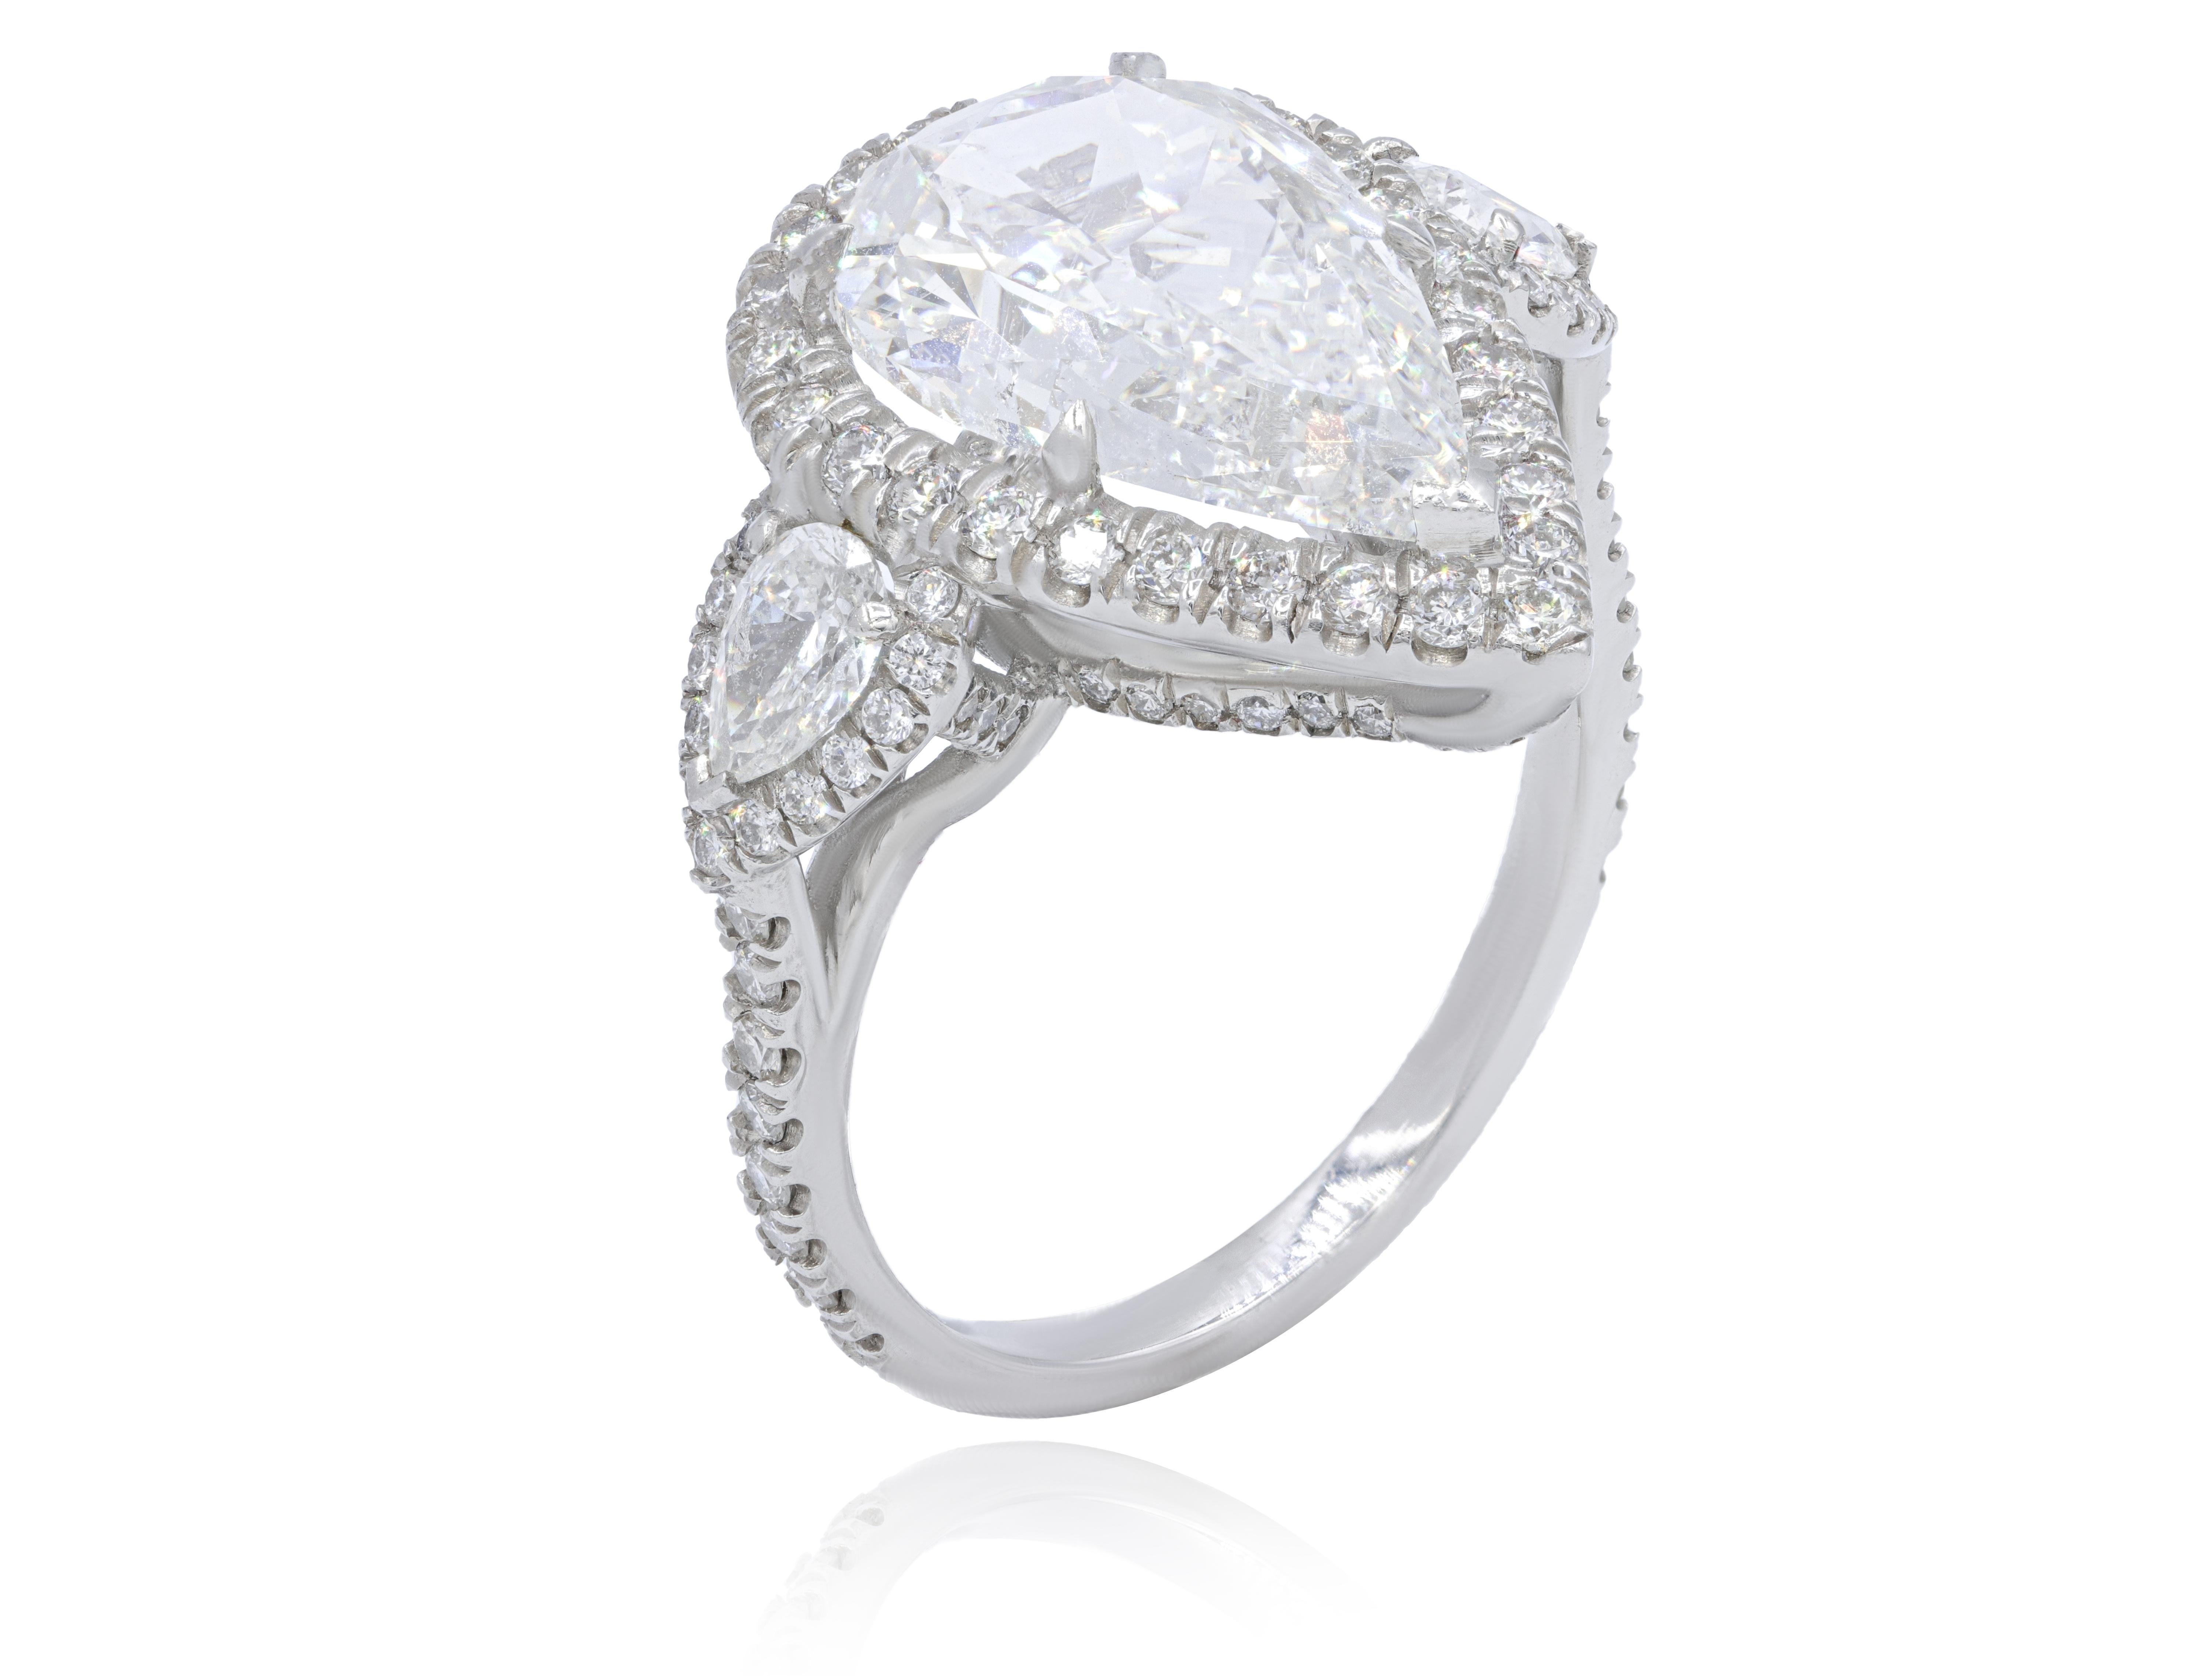 Modern Diana M. Platinum engagement ring featuring a center 5.01 ct GIA (G-SI2) For Sale